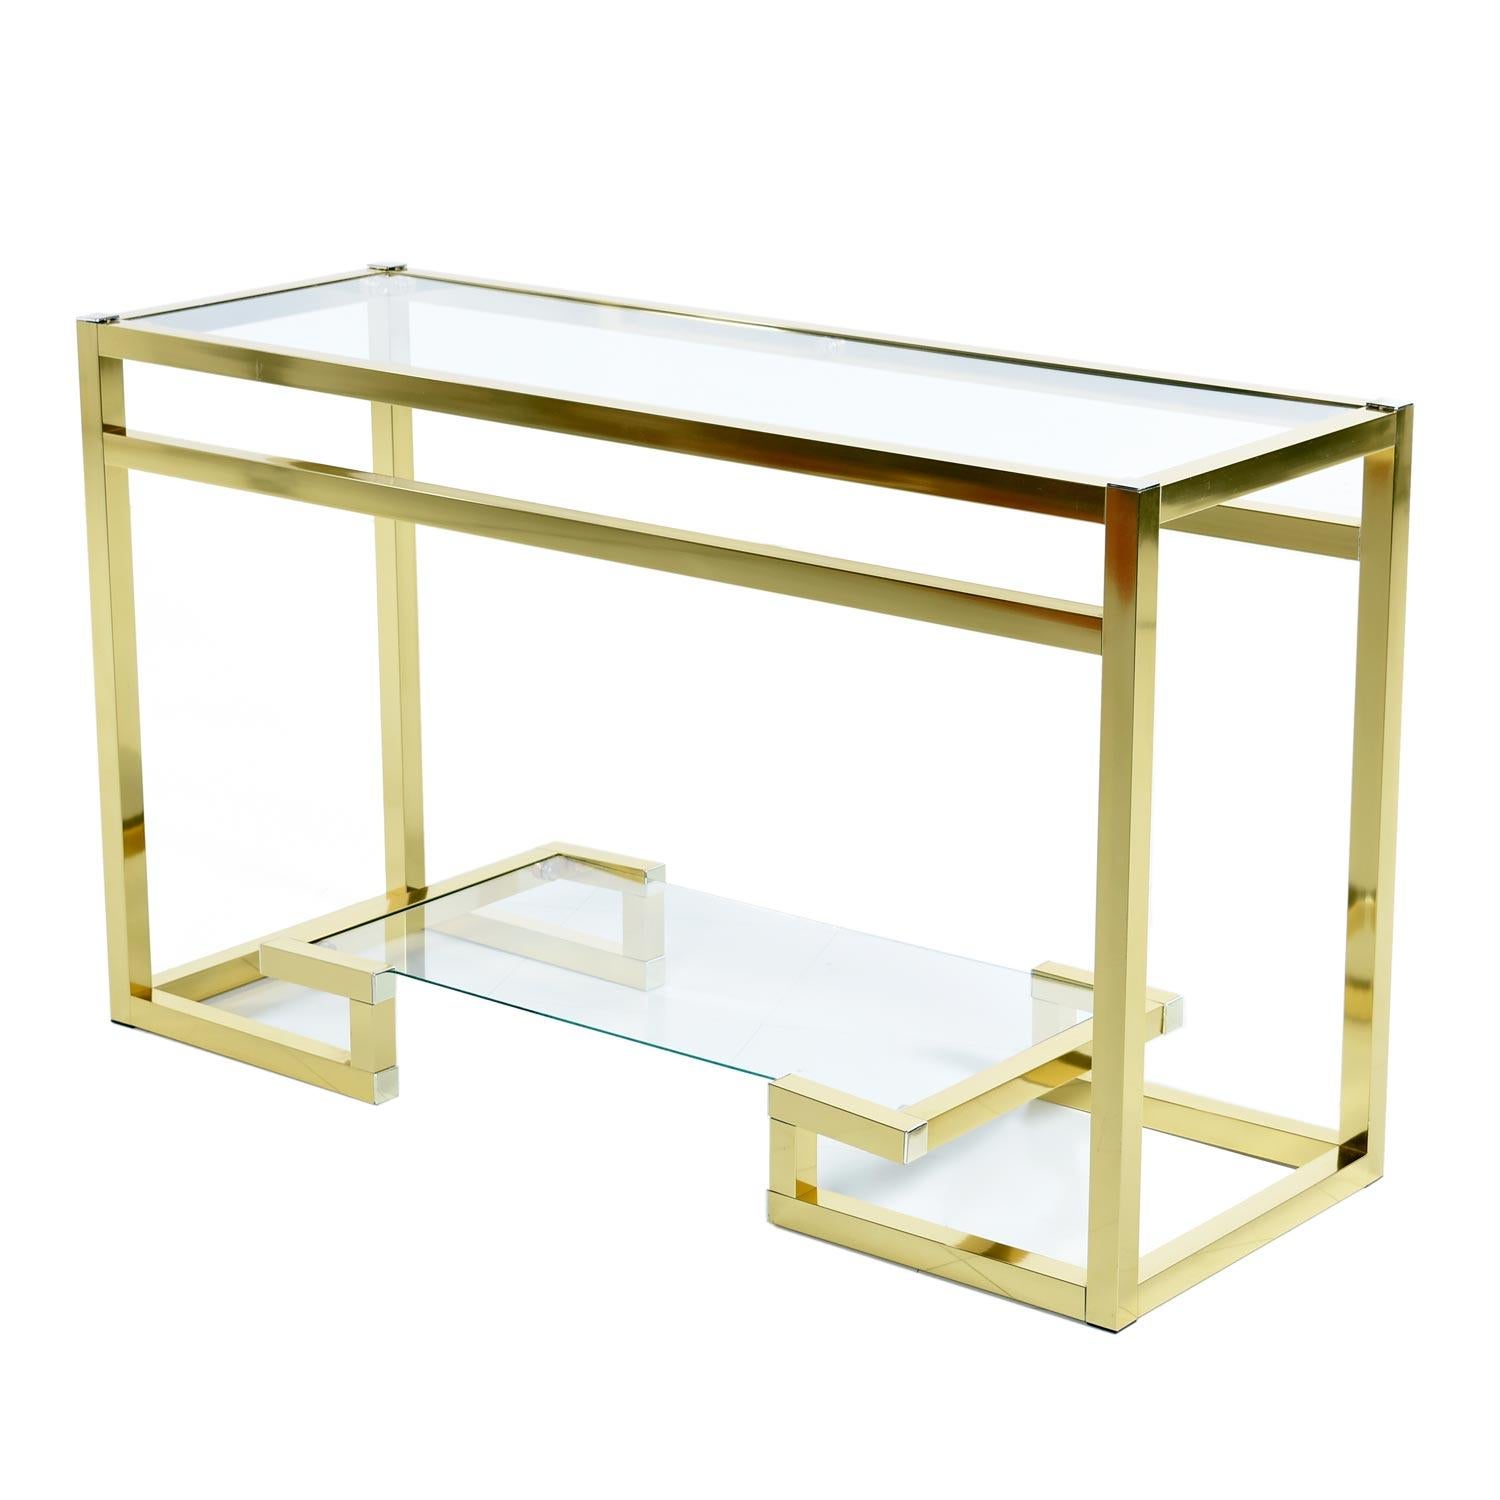 Vintage late 1970s-early 1980s gold Asian-modern meets neo-deco brass / gold colored aluminum console and matching mirror. Combine gilded age glamour with the clean lines and sculptural edge of modern-day design and you get the ever-intriguing